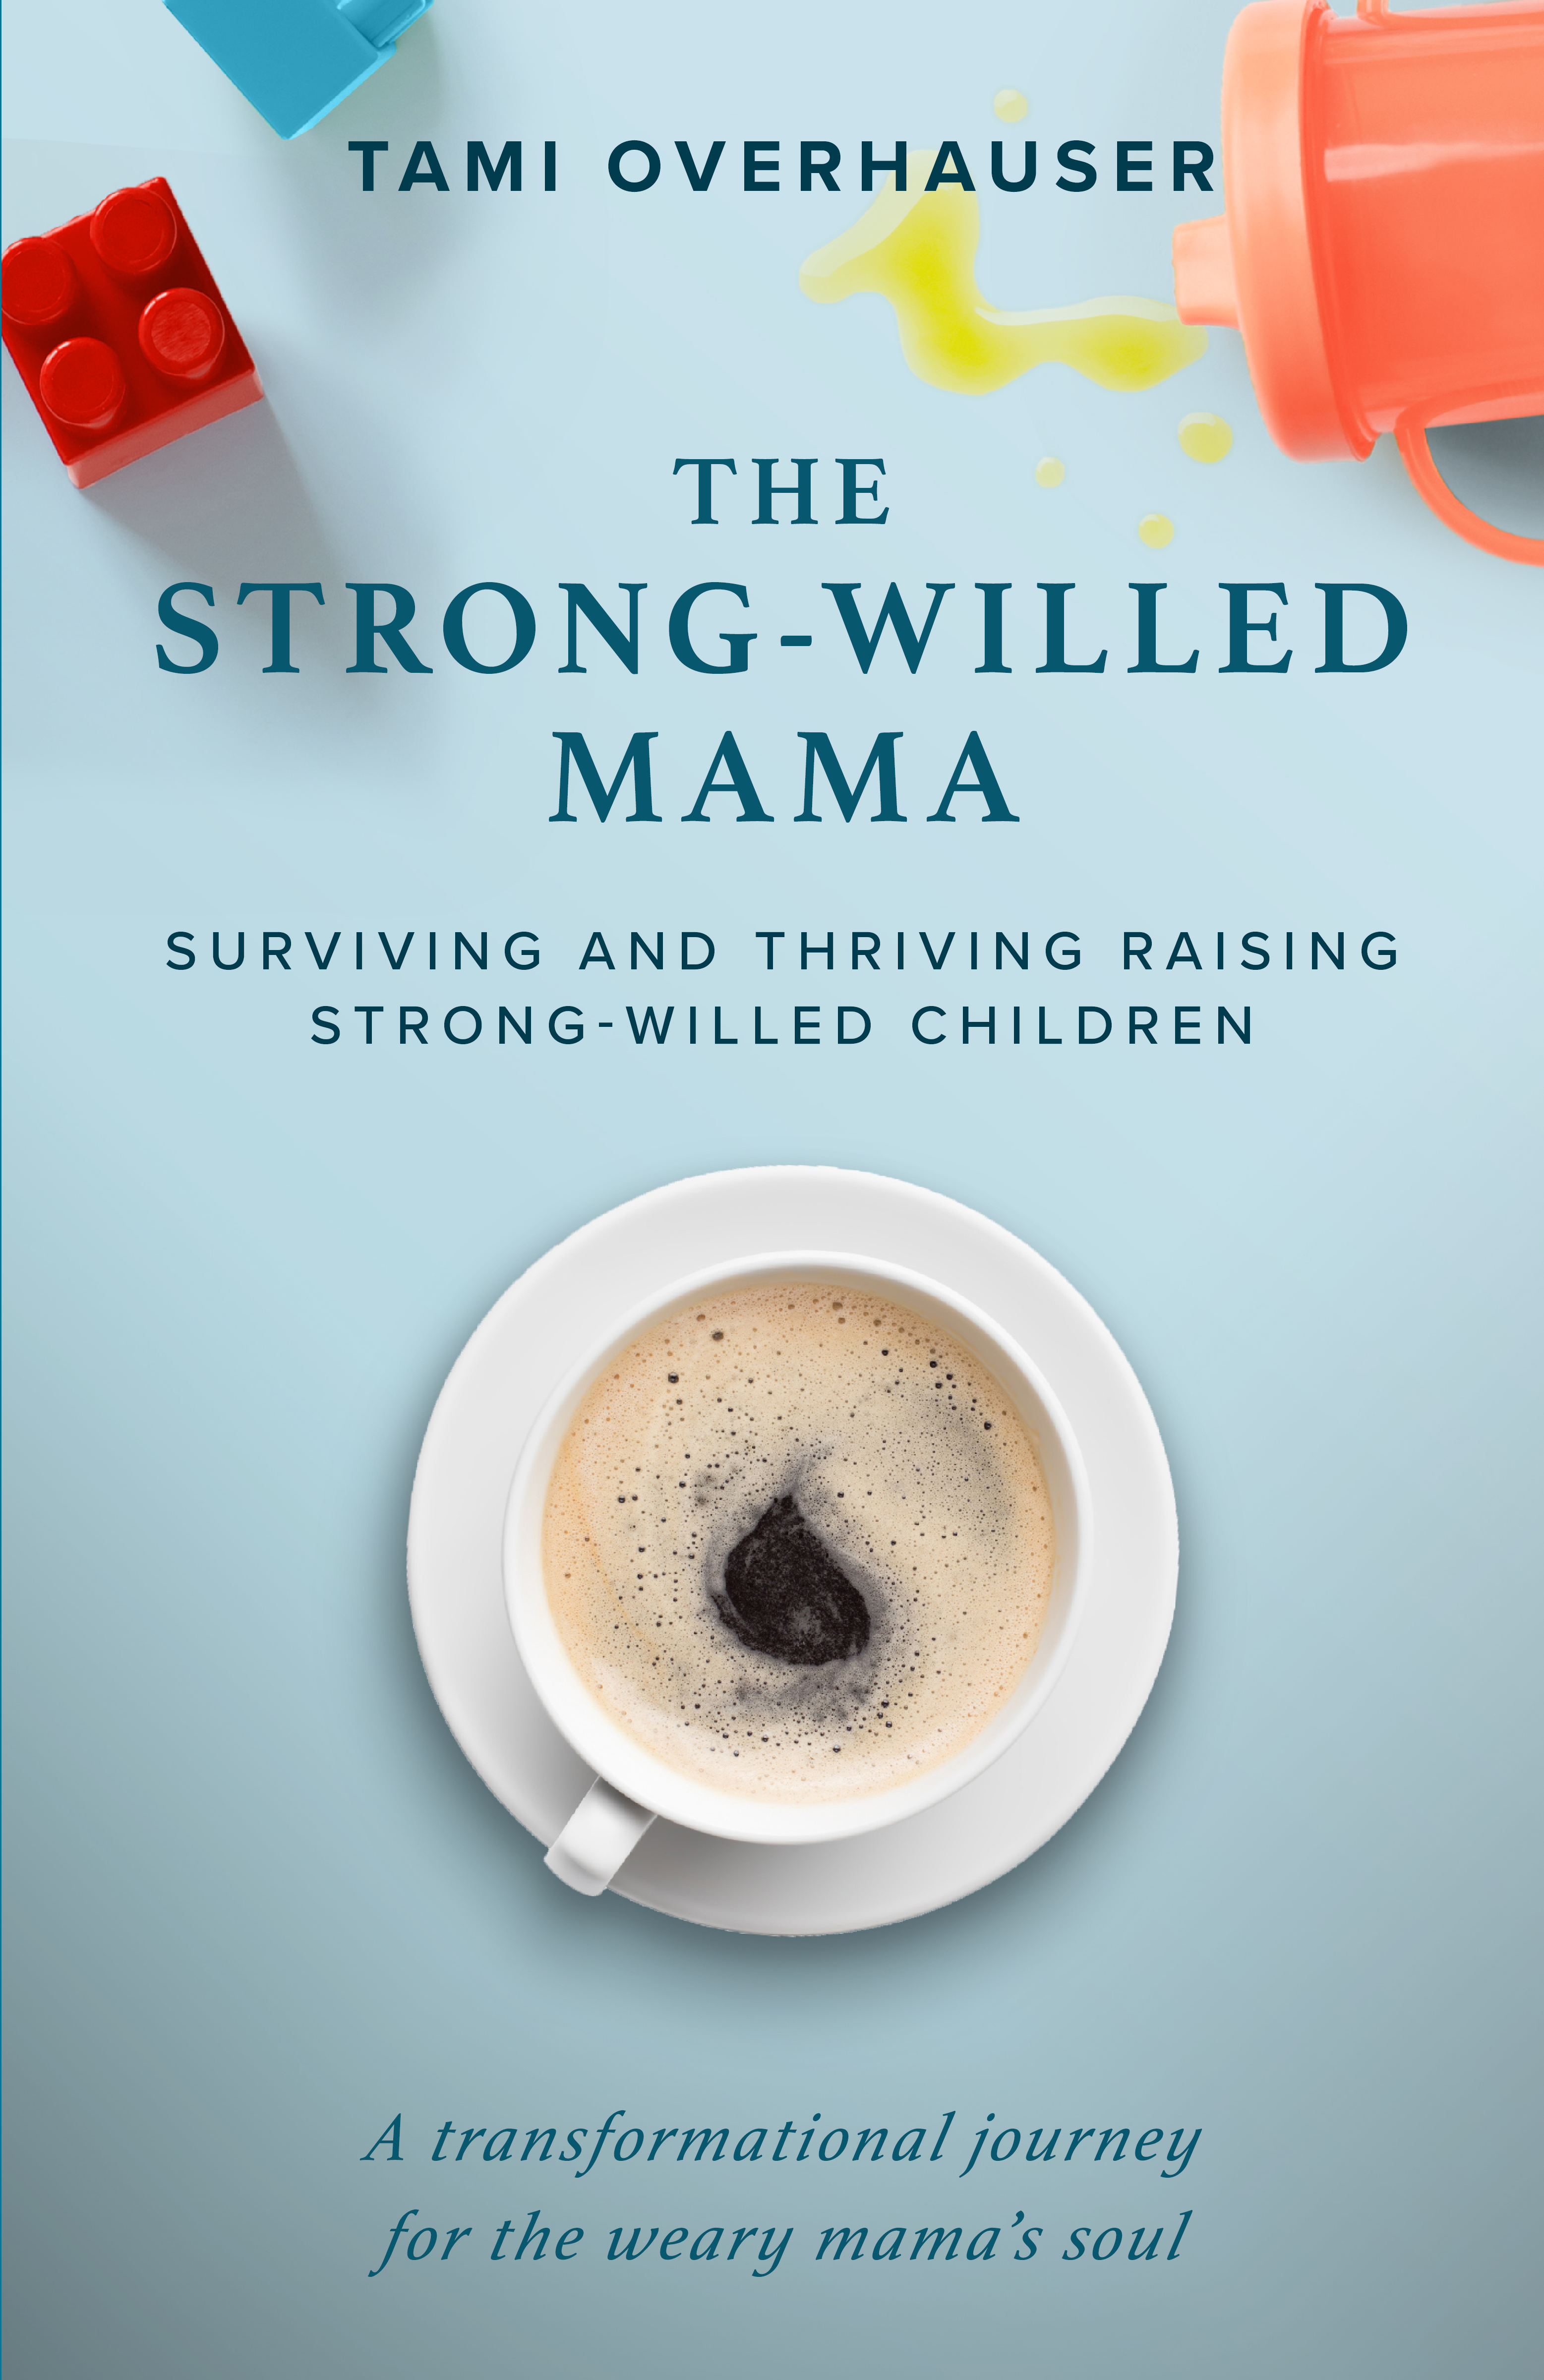 Intensely practical and insightful The Strong-Willed Mama is the kind of book - photo 1